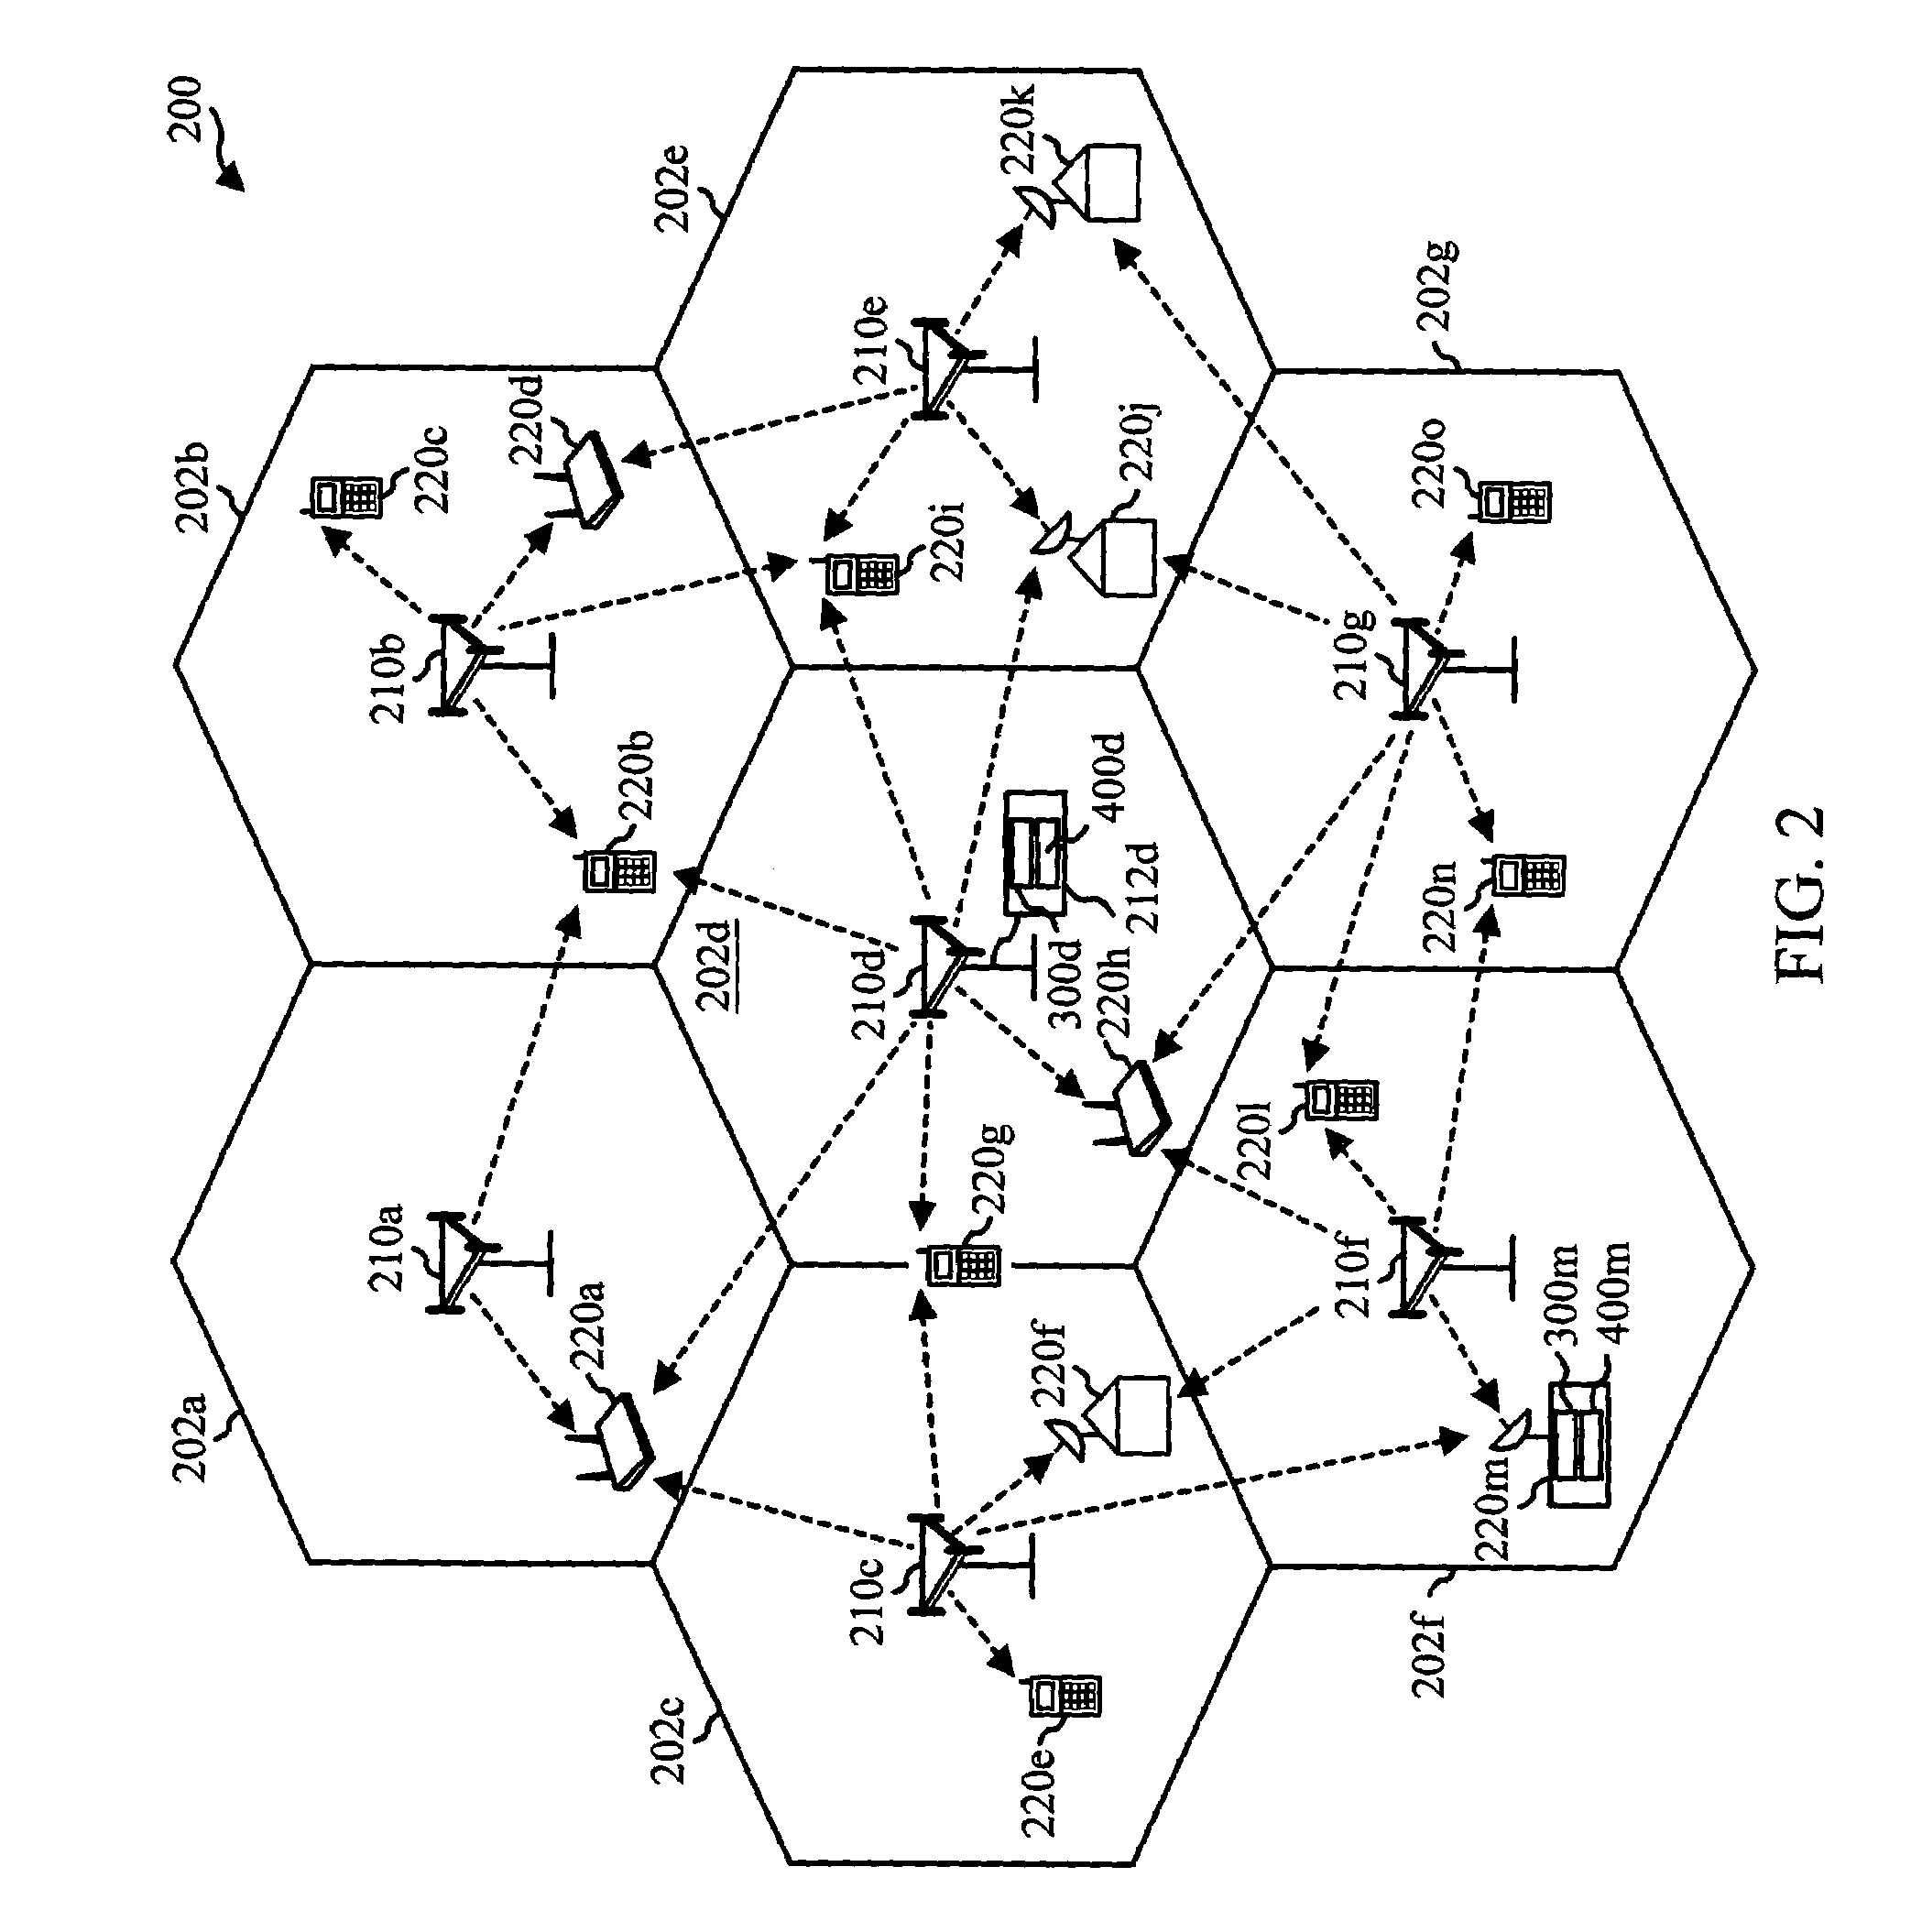 Power control and scheduling in an OFDM system